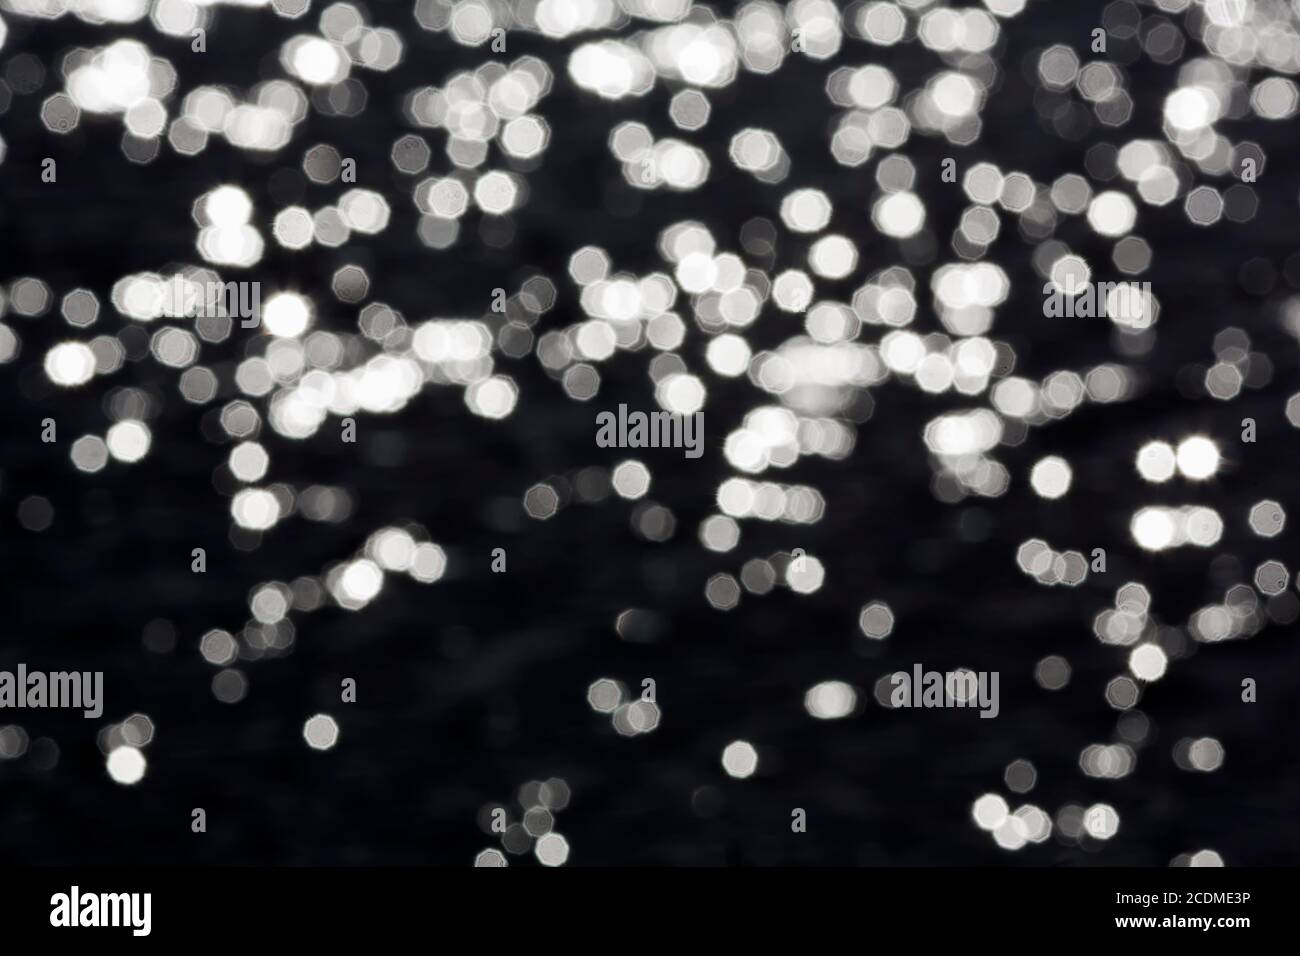 Abstract black background with sparkling white lights, Italy Stock Photo